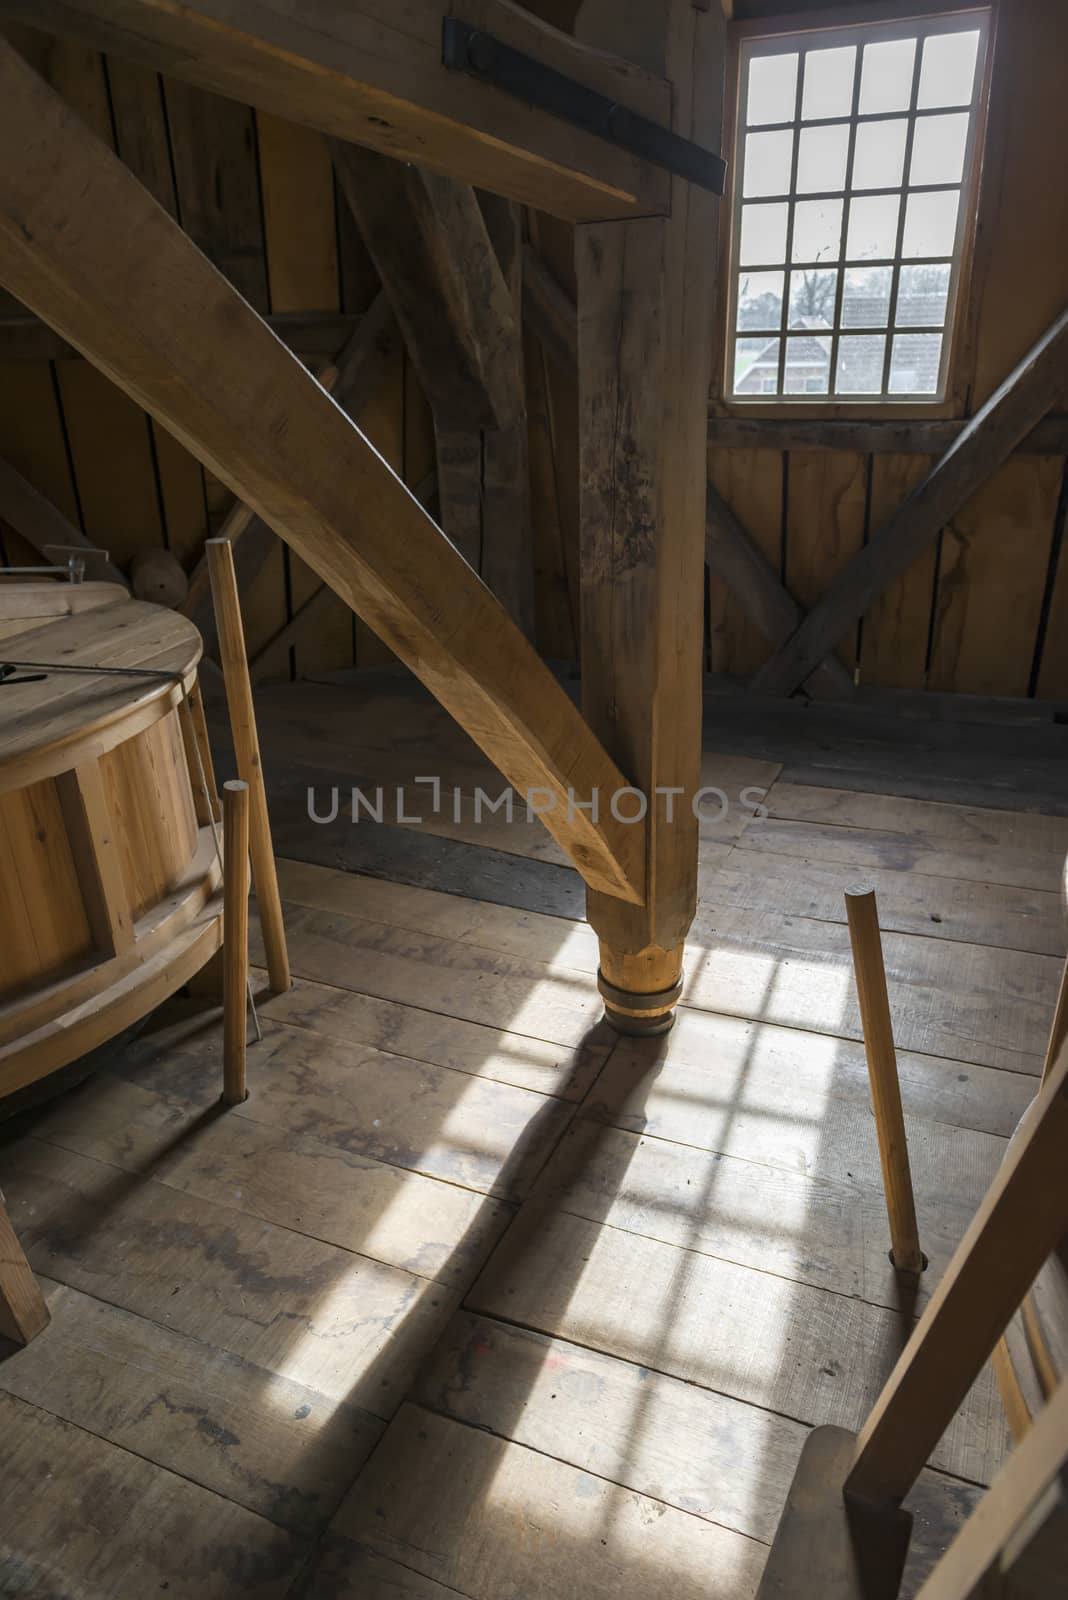 Interior of a historic corn mill in the Netherlands  
 by Tofotografie